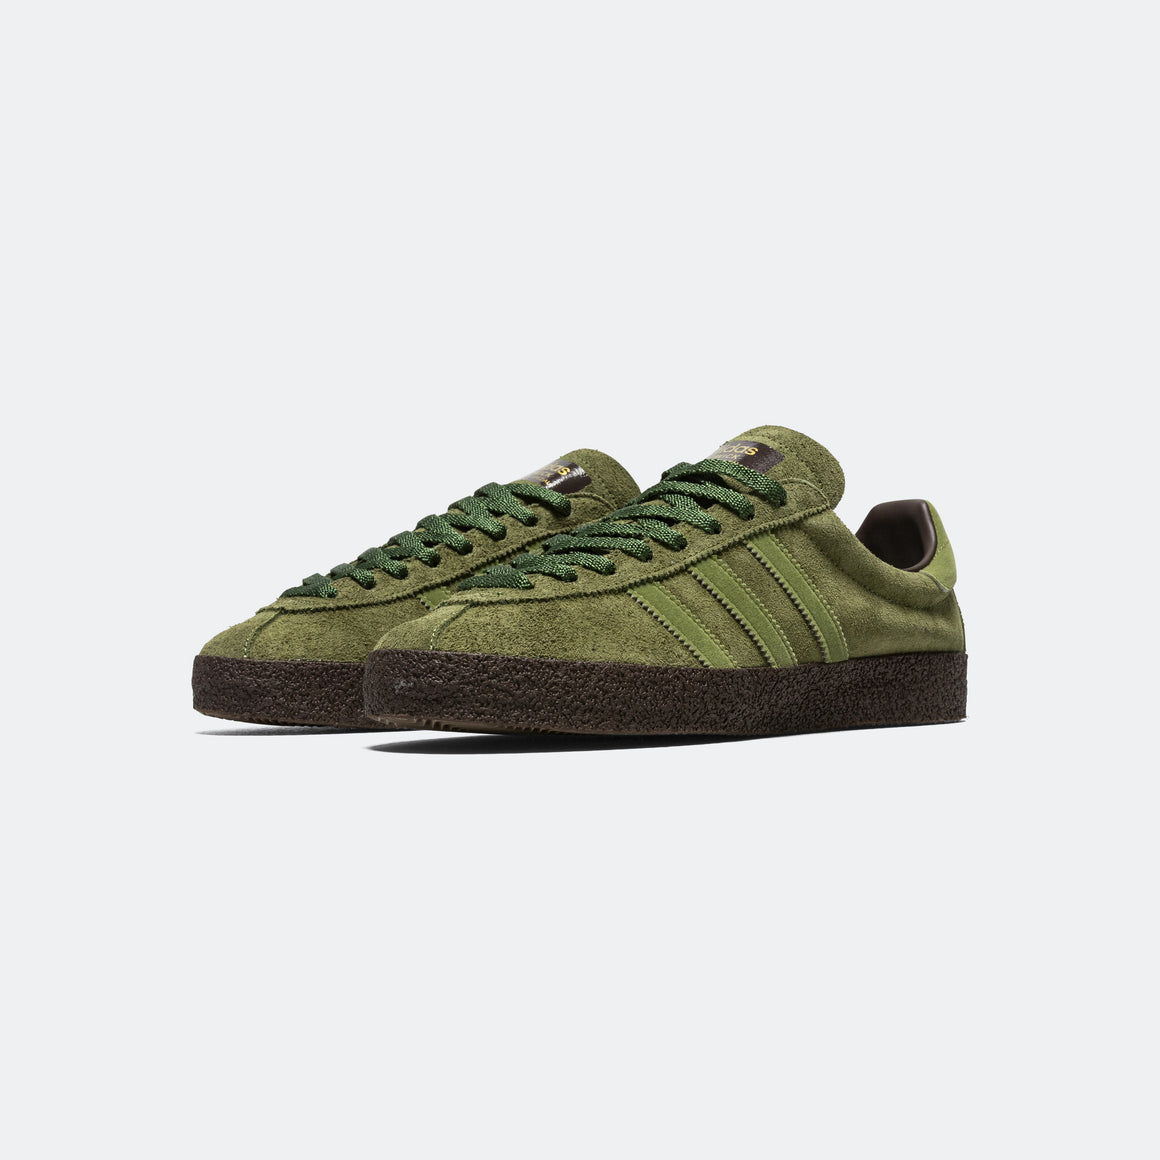 adidas - Ardwick Spzl - Craft Green/Tech Olive-Dark Brown - UP THERE